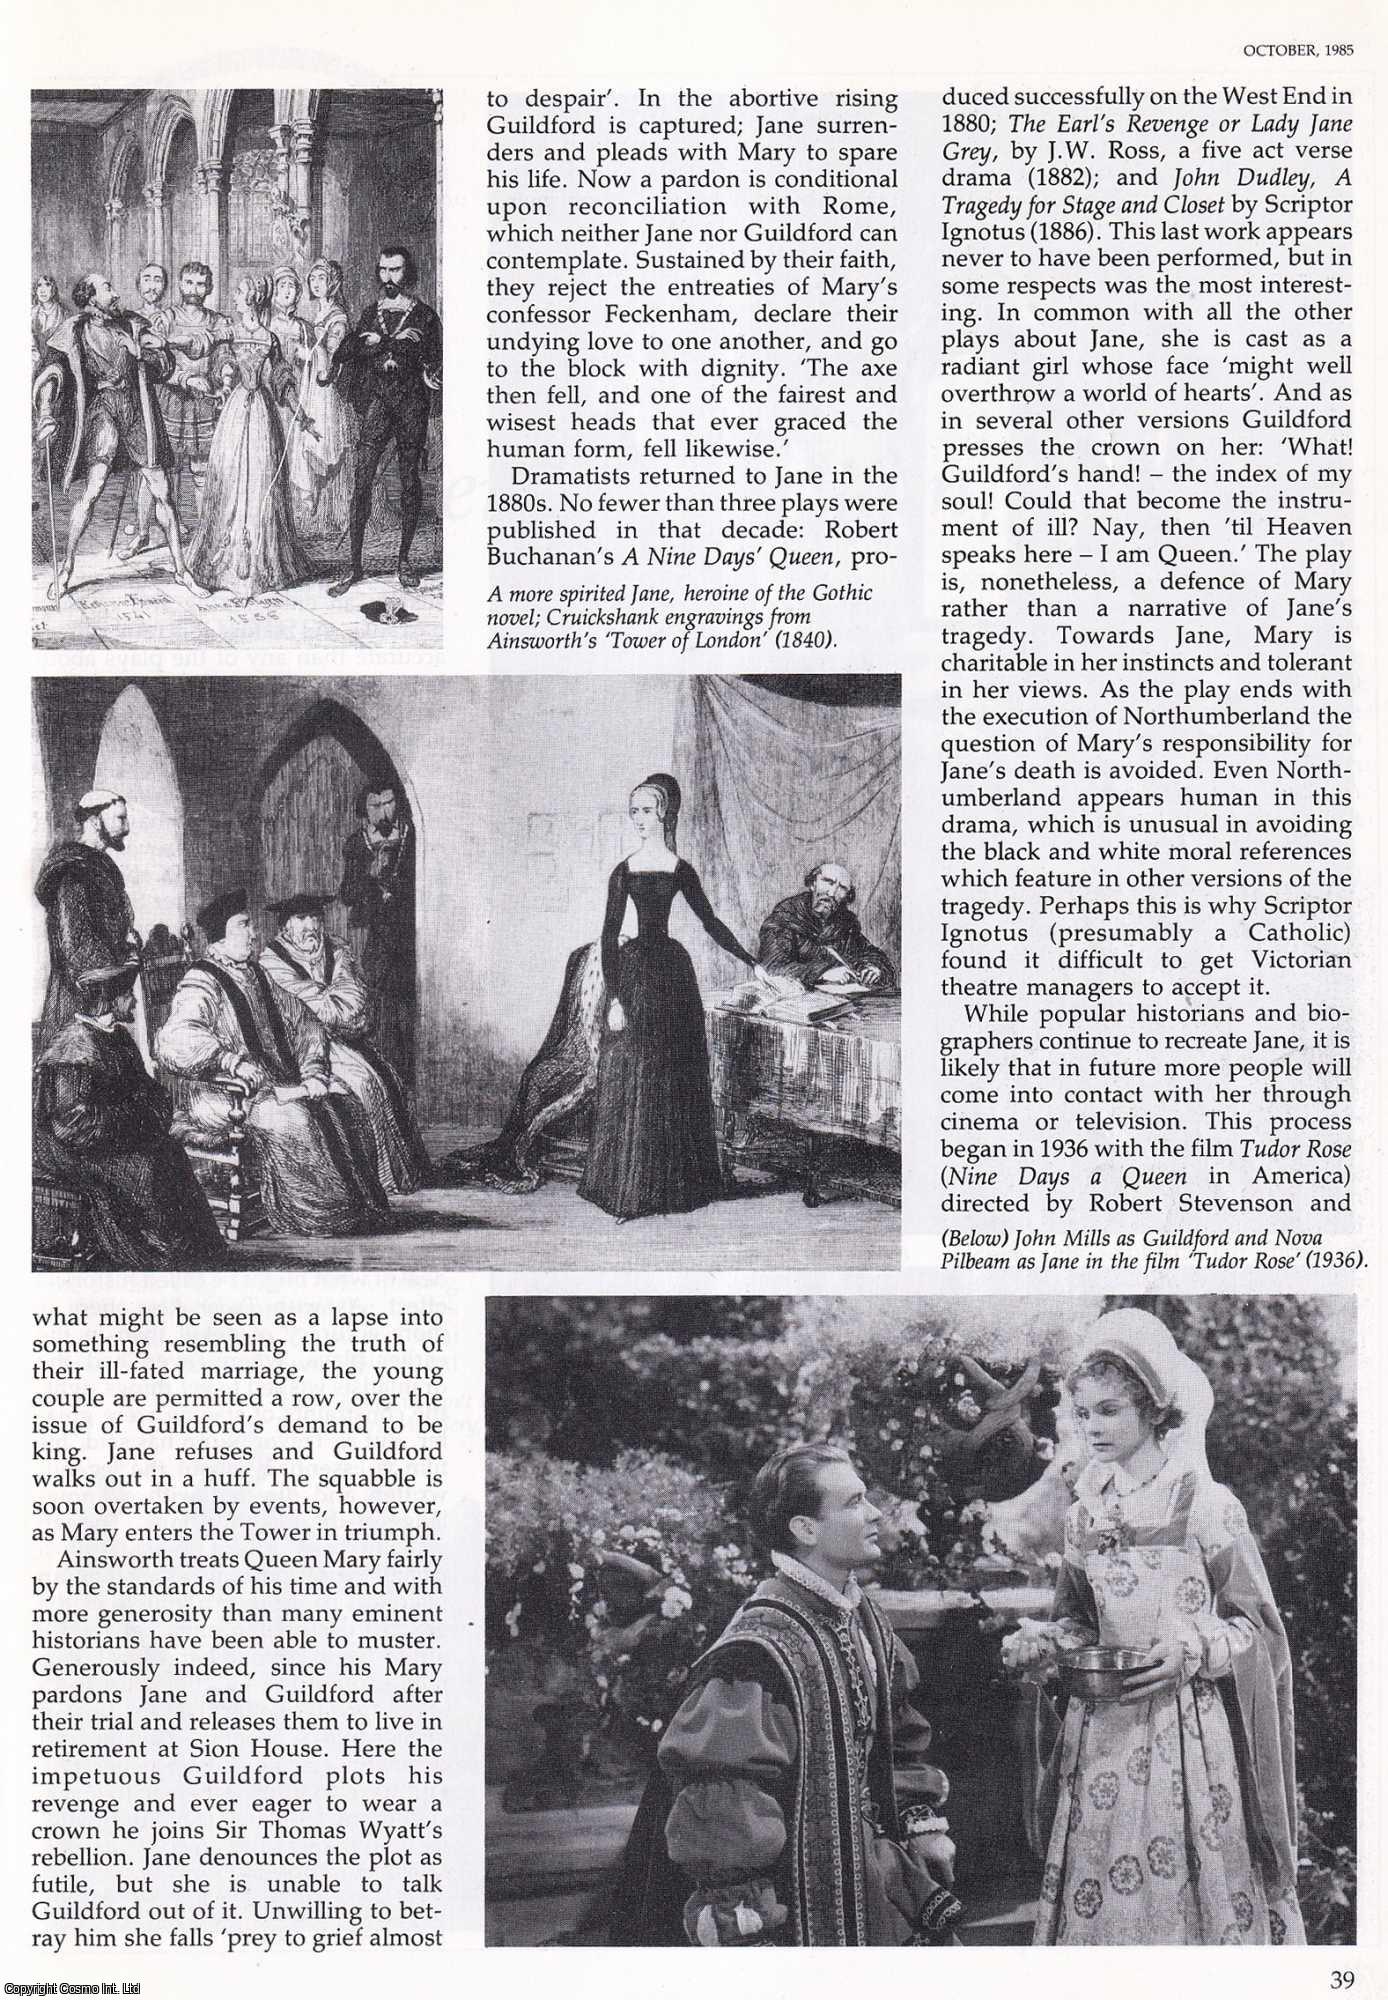 Frank Prochaska - The Many Faces of Lady Jane Grey. An original article from History Today, 1985.